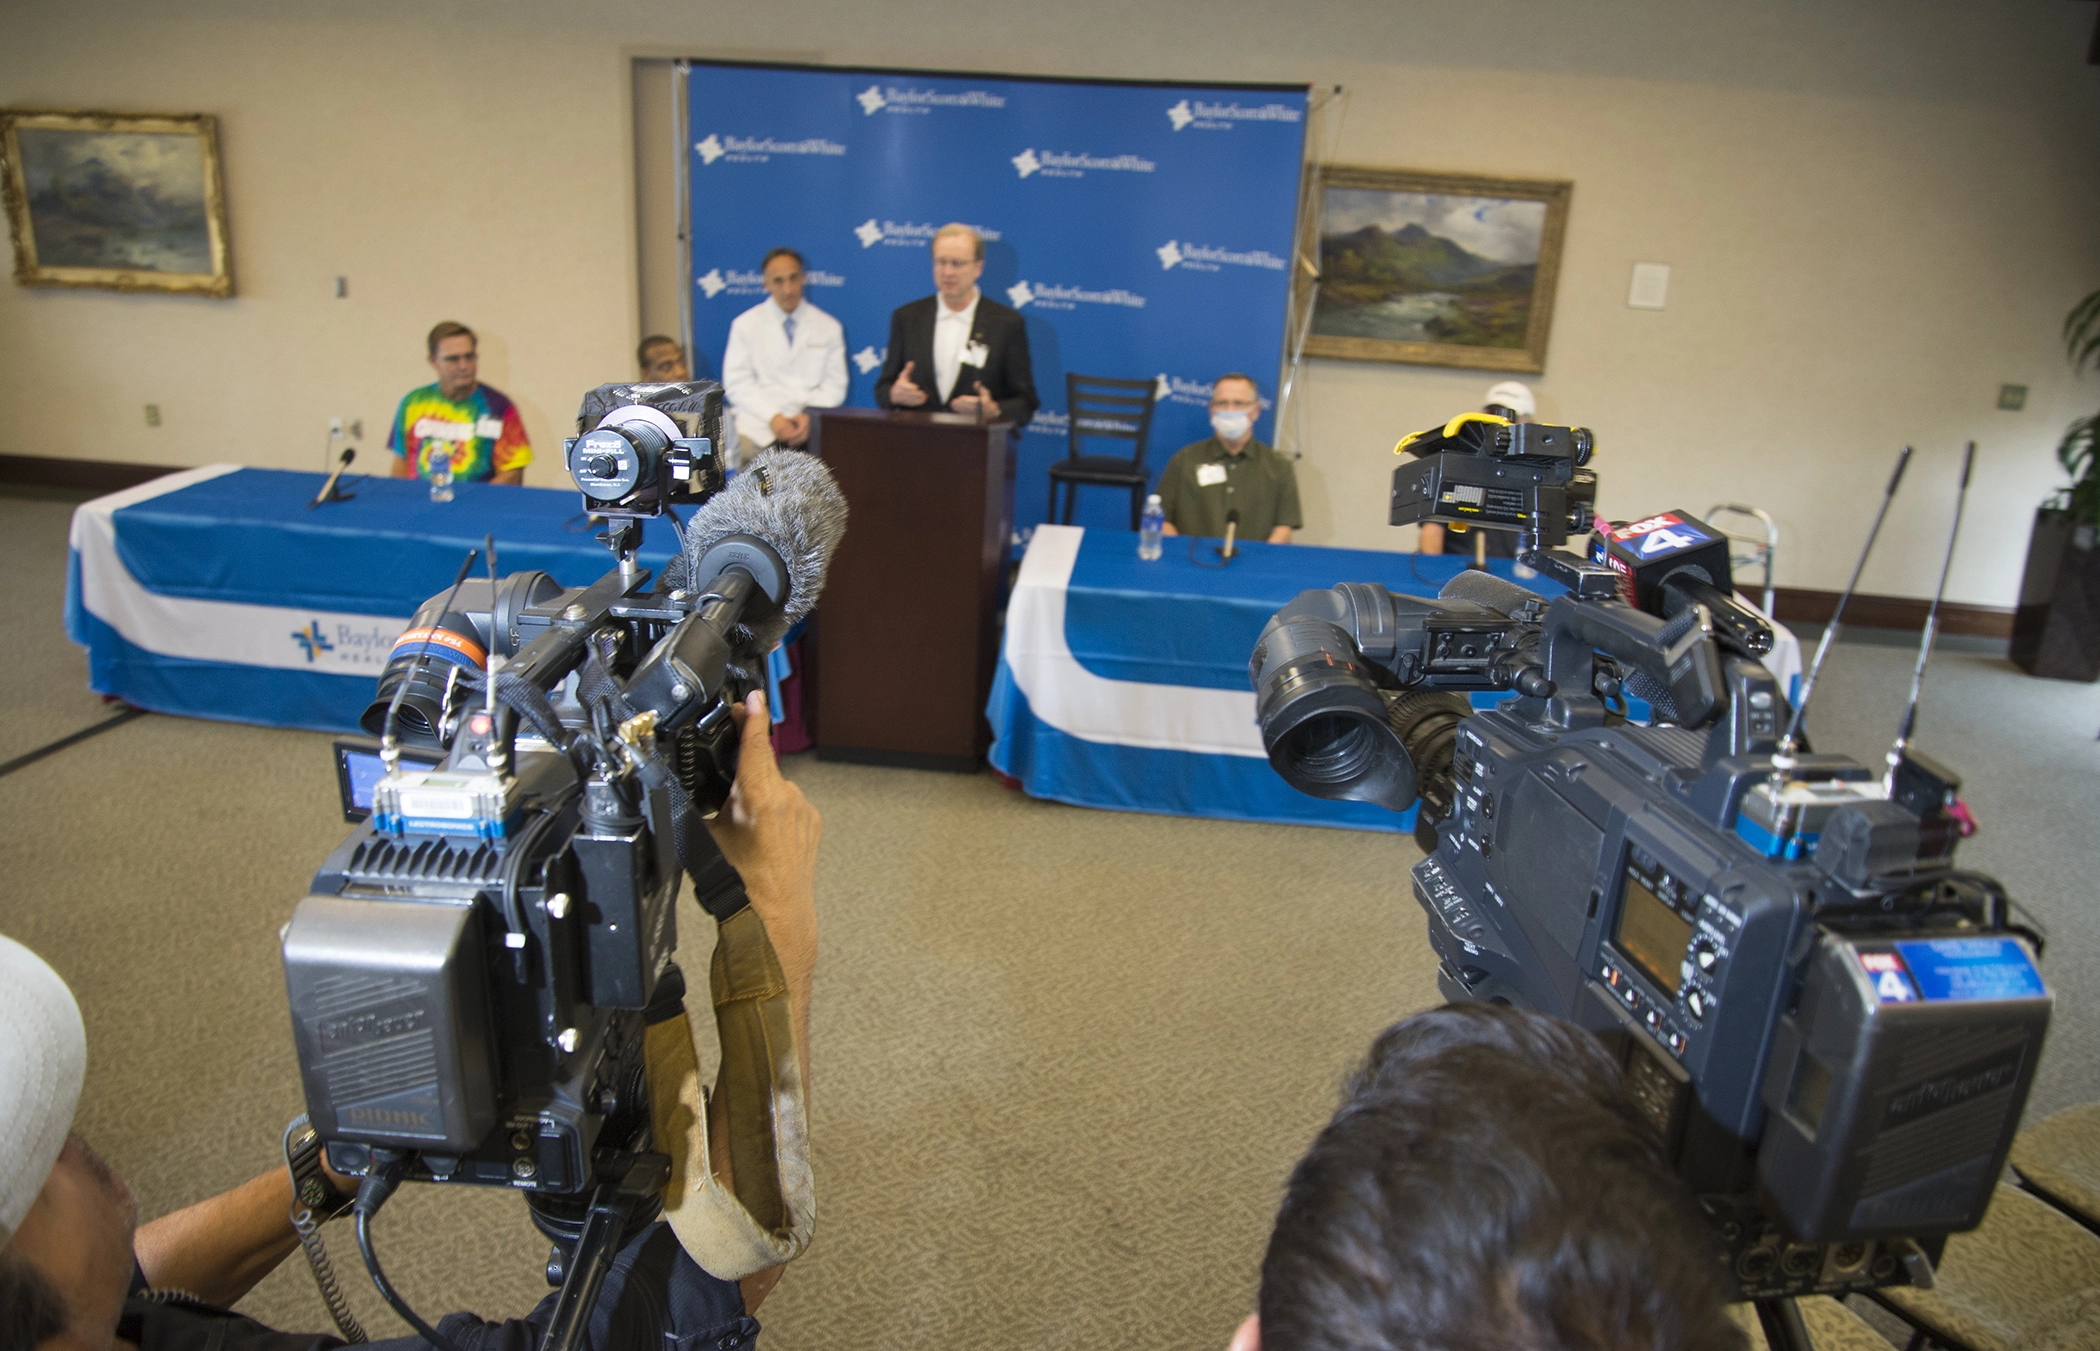 Media joins transplant leadership and organ recipients at Baylor Dallas for a press conference celebrating milestone in transplant history for the Baylor Simmons Transplant Institute.